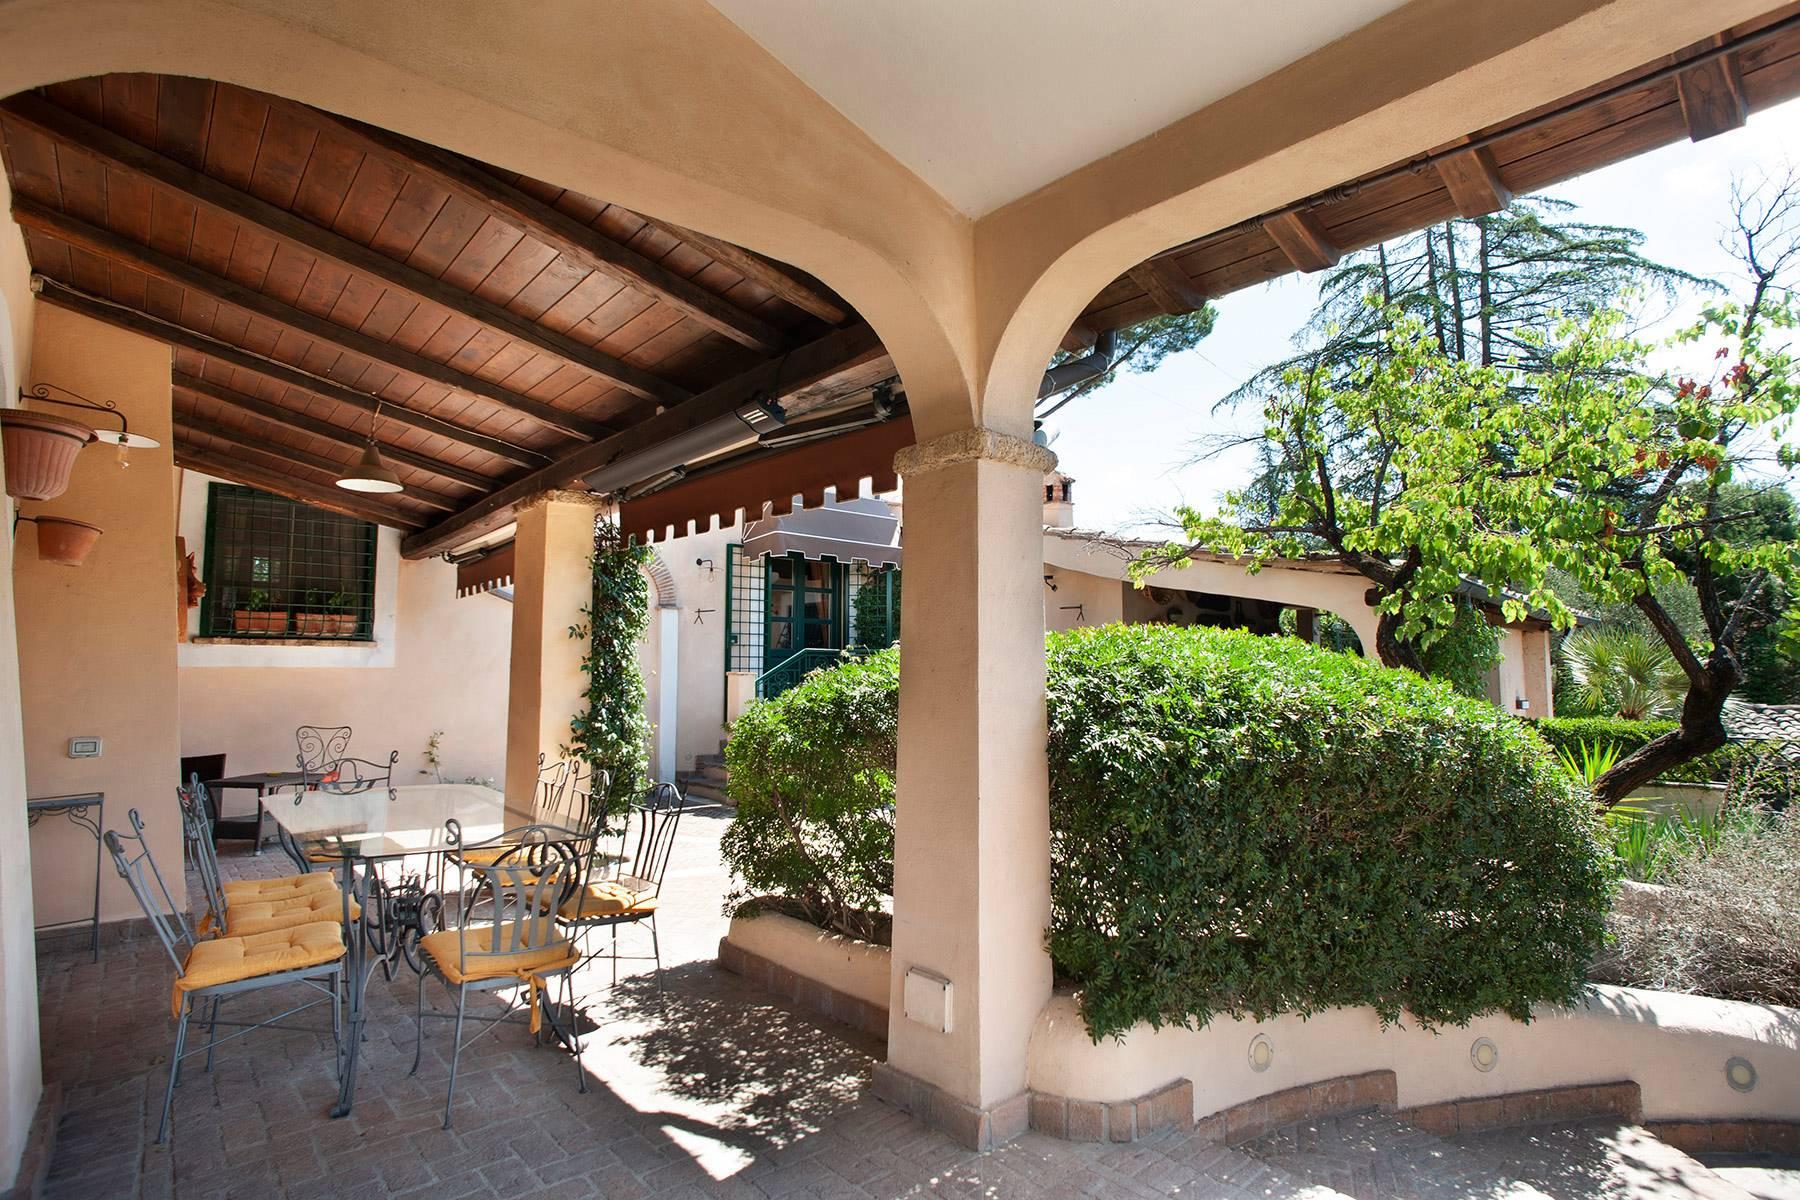 Villa Nayara - Lovely mansion with swimming pool 30 minutes from Rome - 51